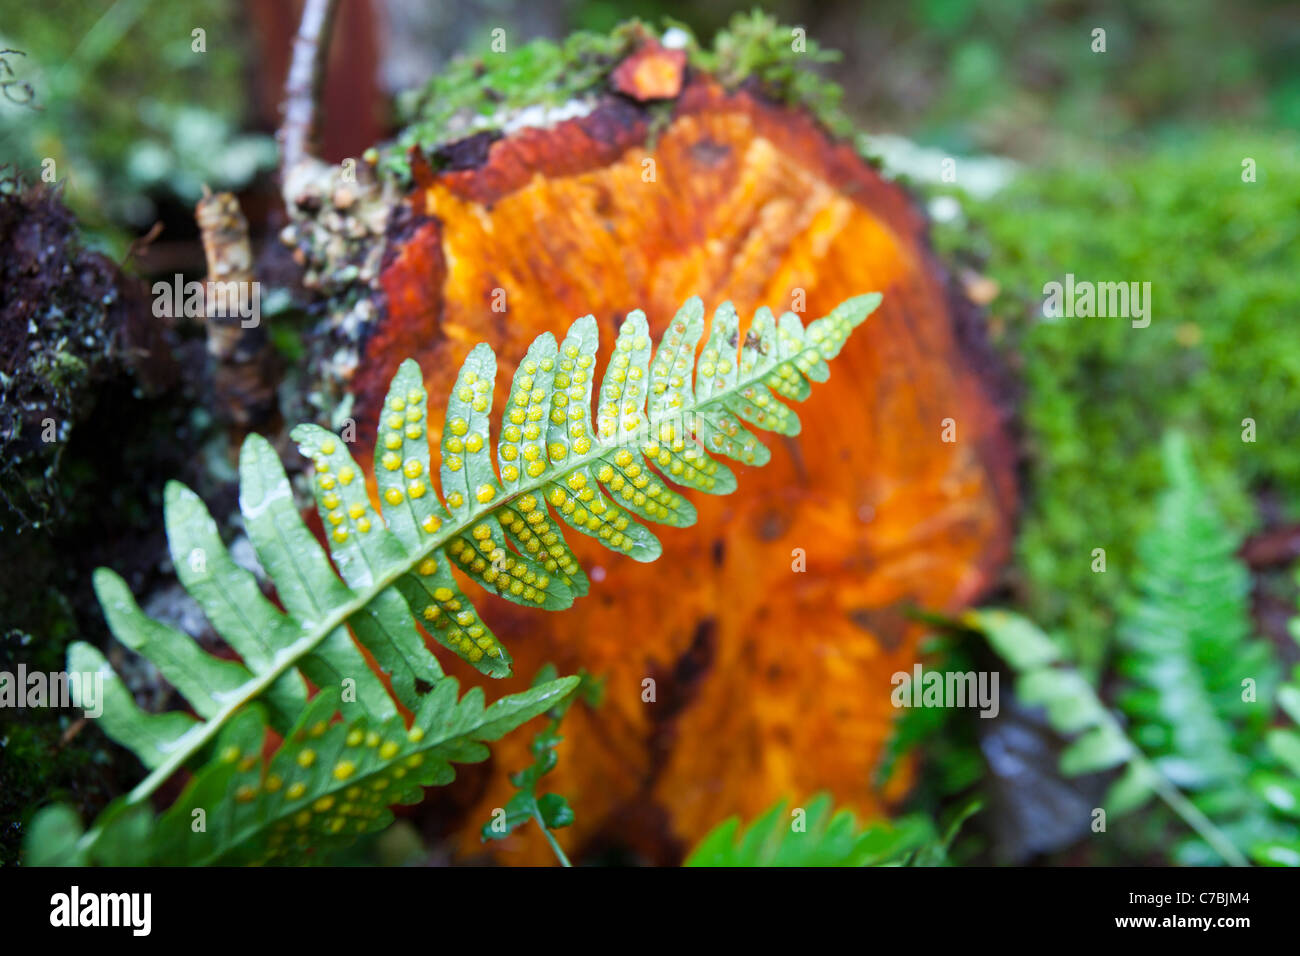 A small fern with spores on its underside in front of a felled Alder tree, in woodland near Dulverton, Devon, UK. Stock Photo